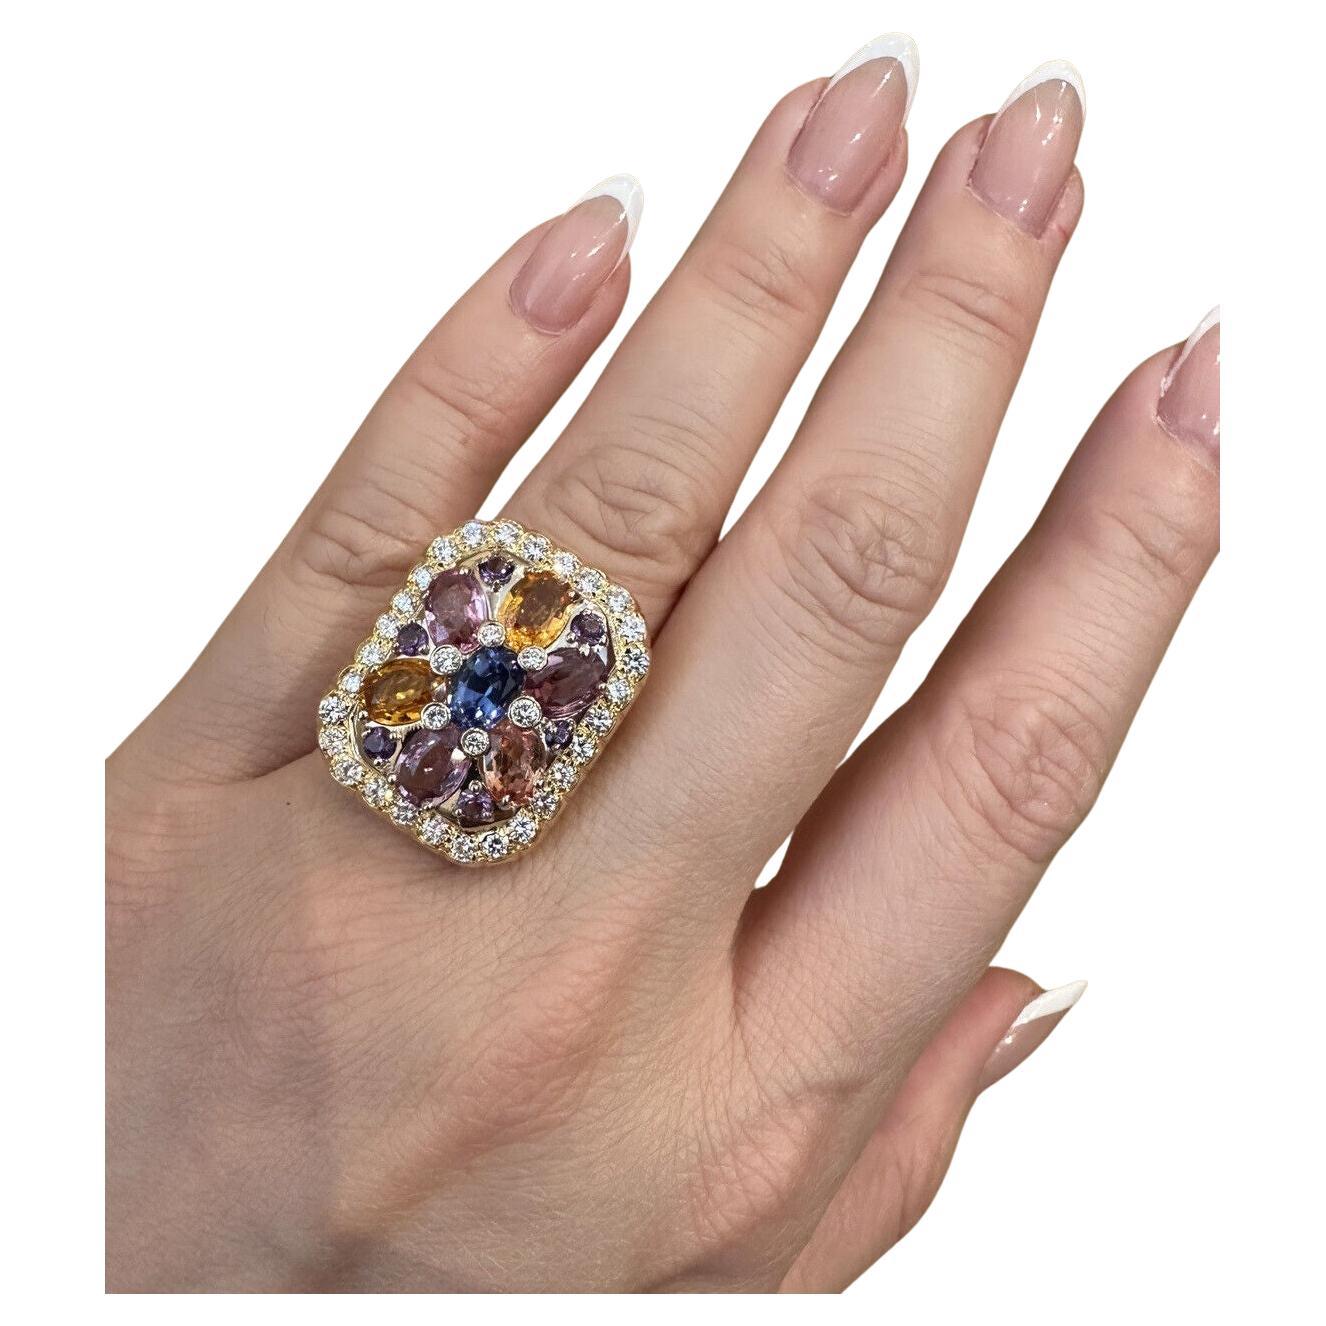 Multicolor Sapphire & Diamond Large Cocktail Ring in 18k Yellow Gold 

Sapphire and Diamond Ring features Clusters of  Blue, Pink, and Orange Natural Oval Sapphires set with Round Brilliant Diamonds and Round Purple Amethysts set in 18k Yellow